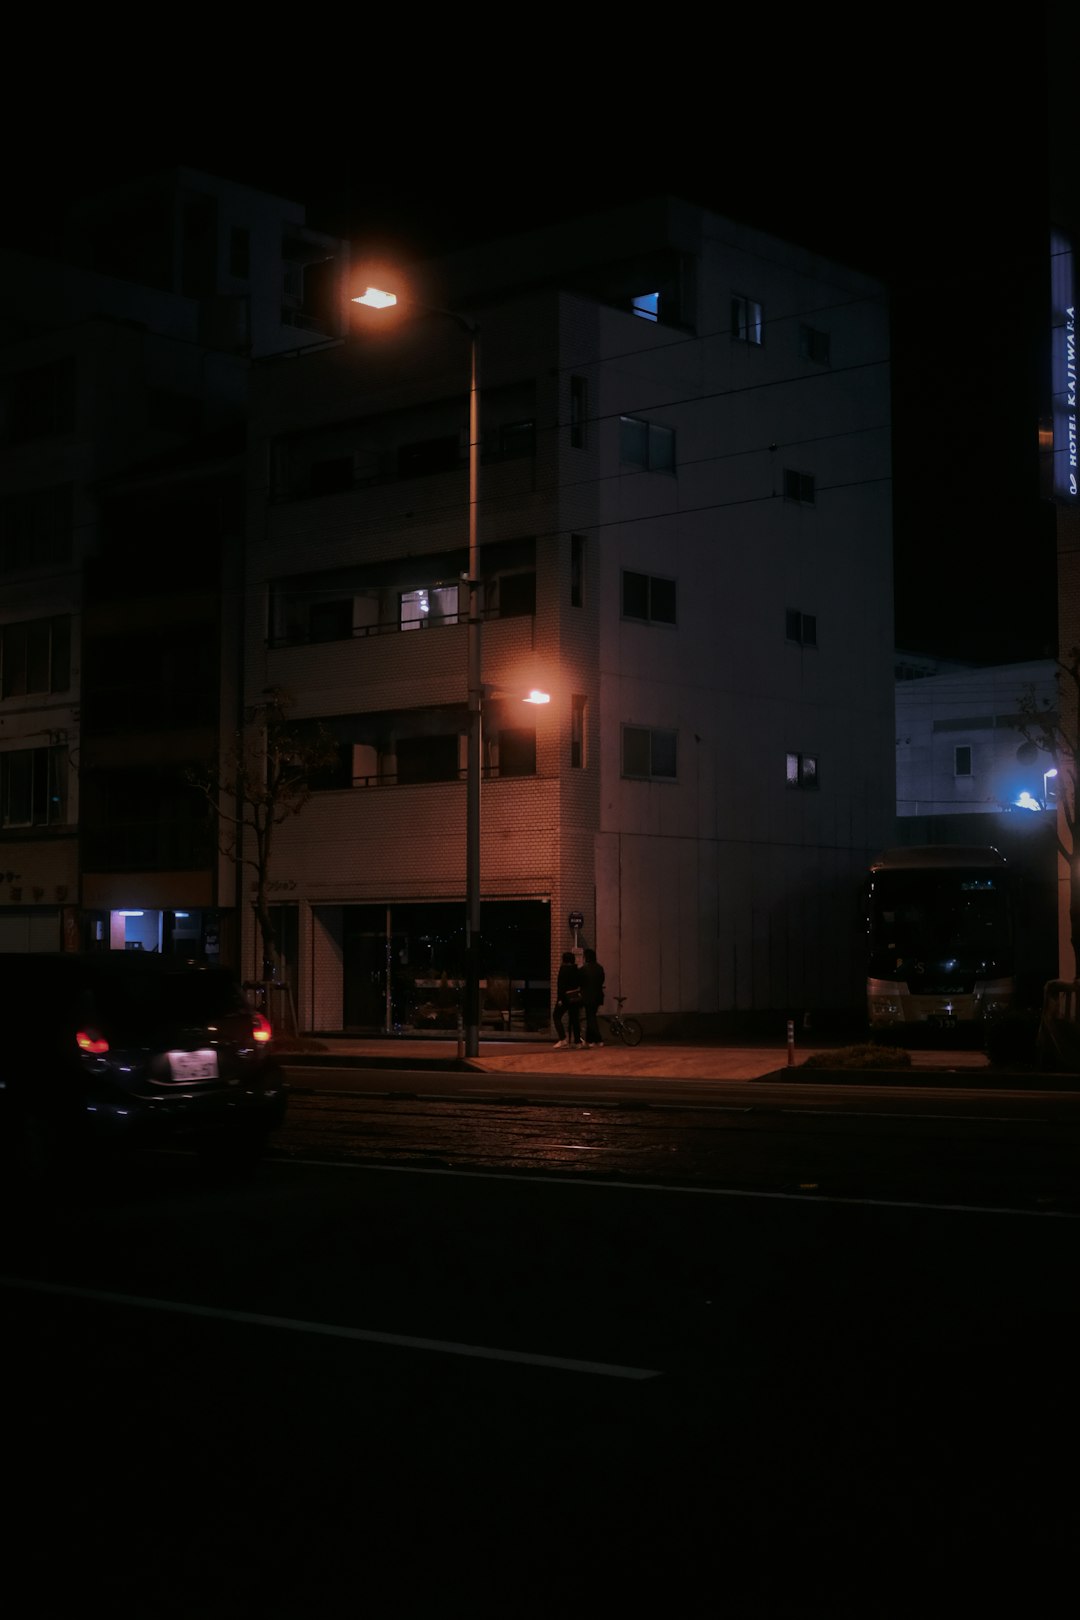 cars parked in front of white building during night time